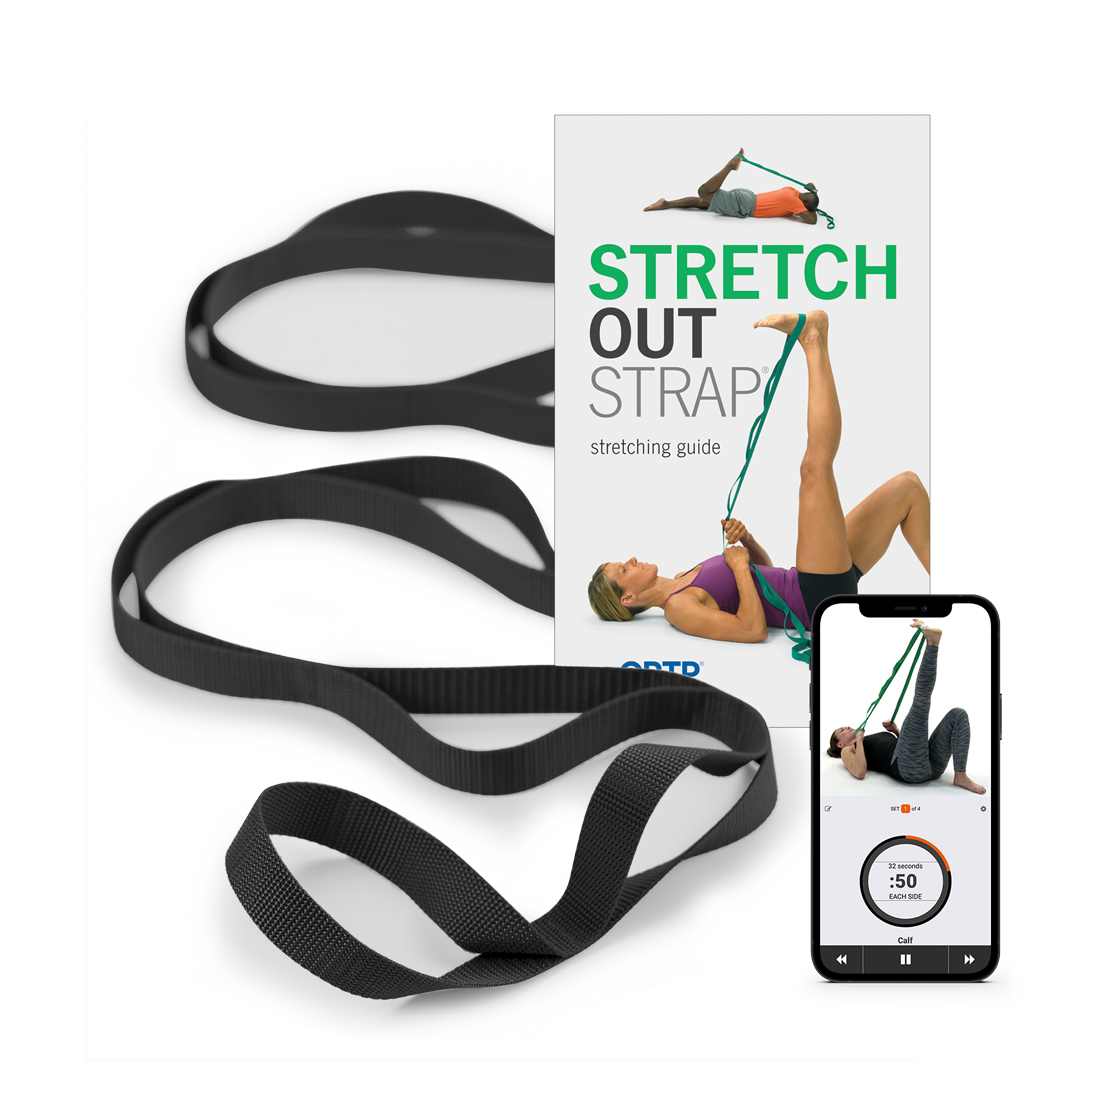 OPTP Stretch Out Strap with 2nd Edition Booklet : for effective stretches